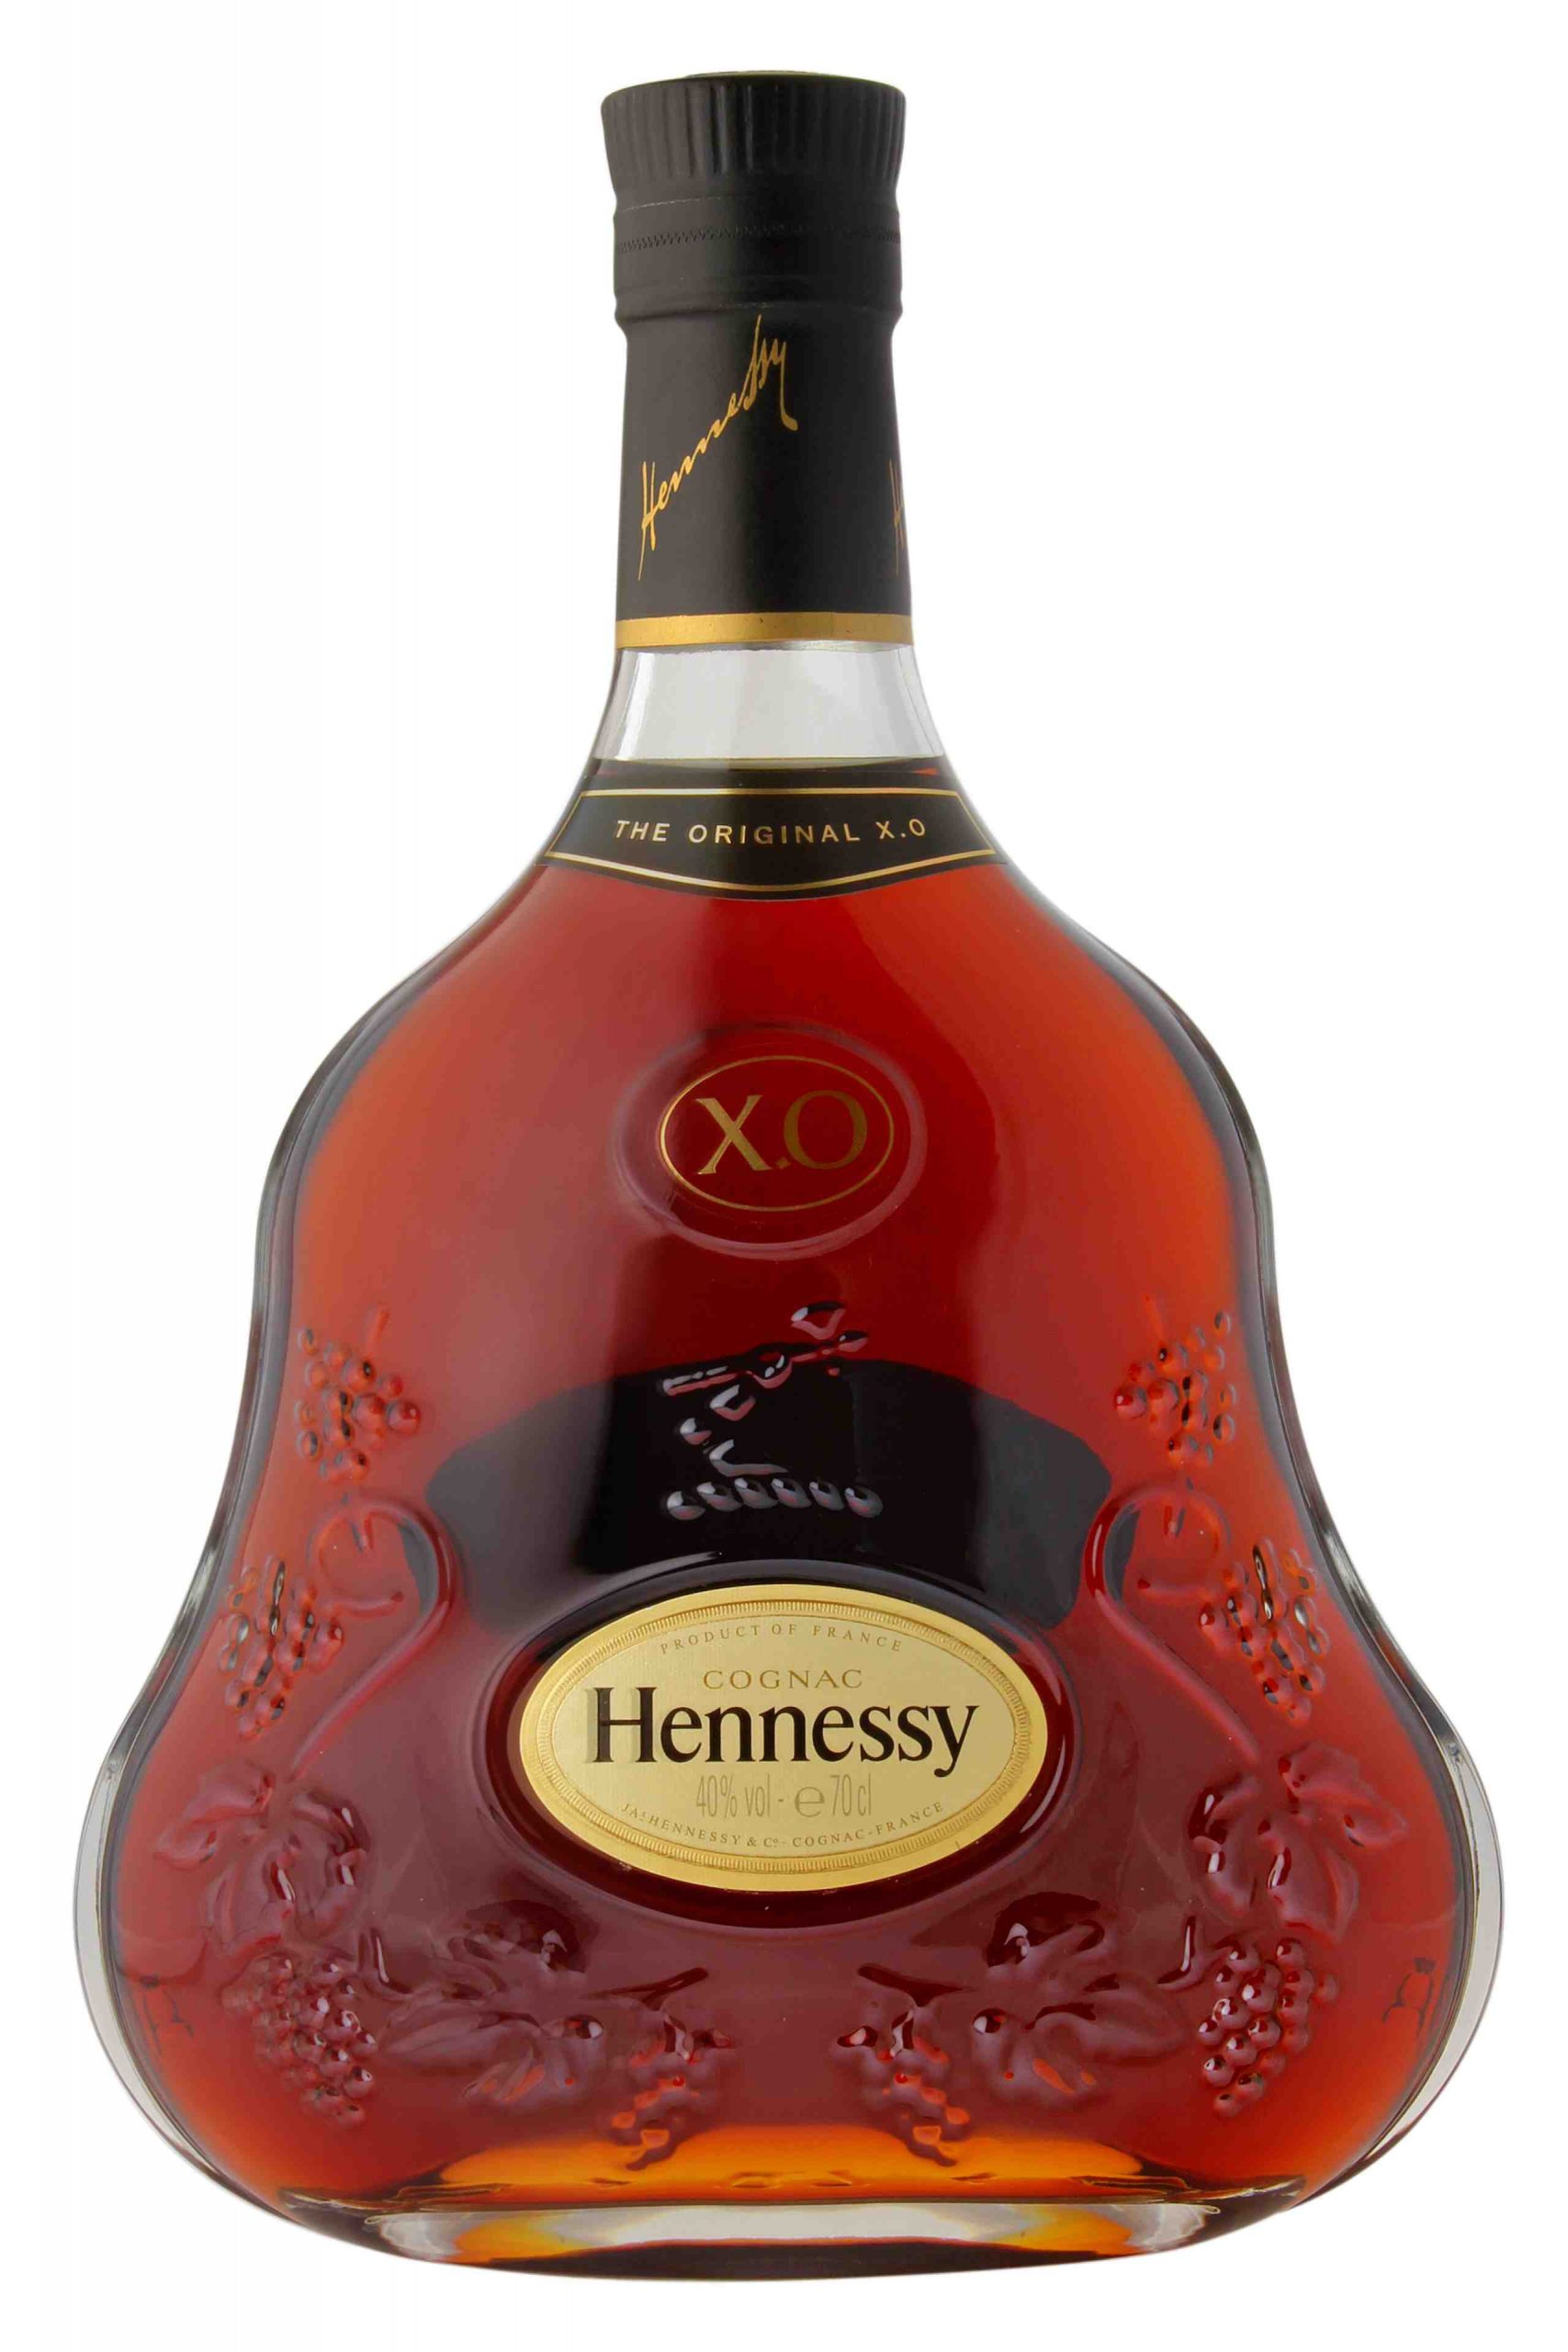 Hennessy XO Price and Cognac Review of this extra old Brandy